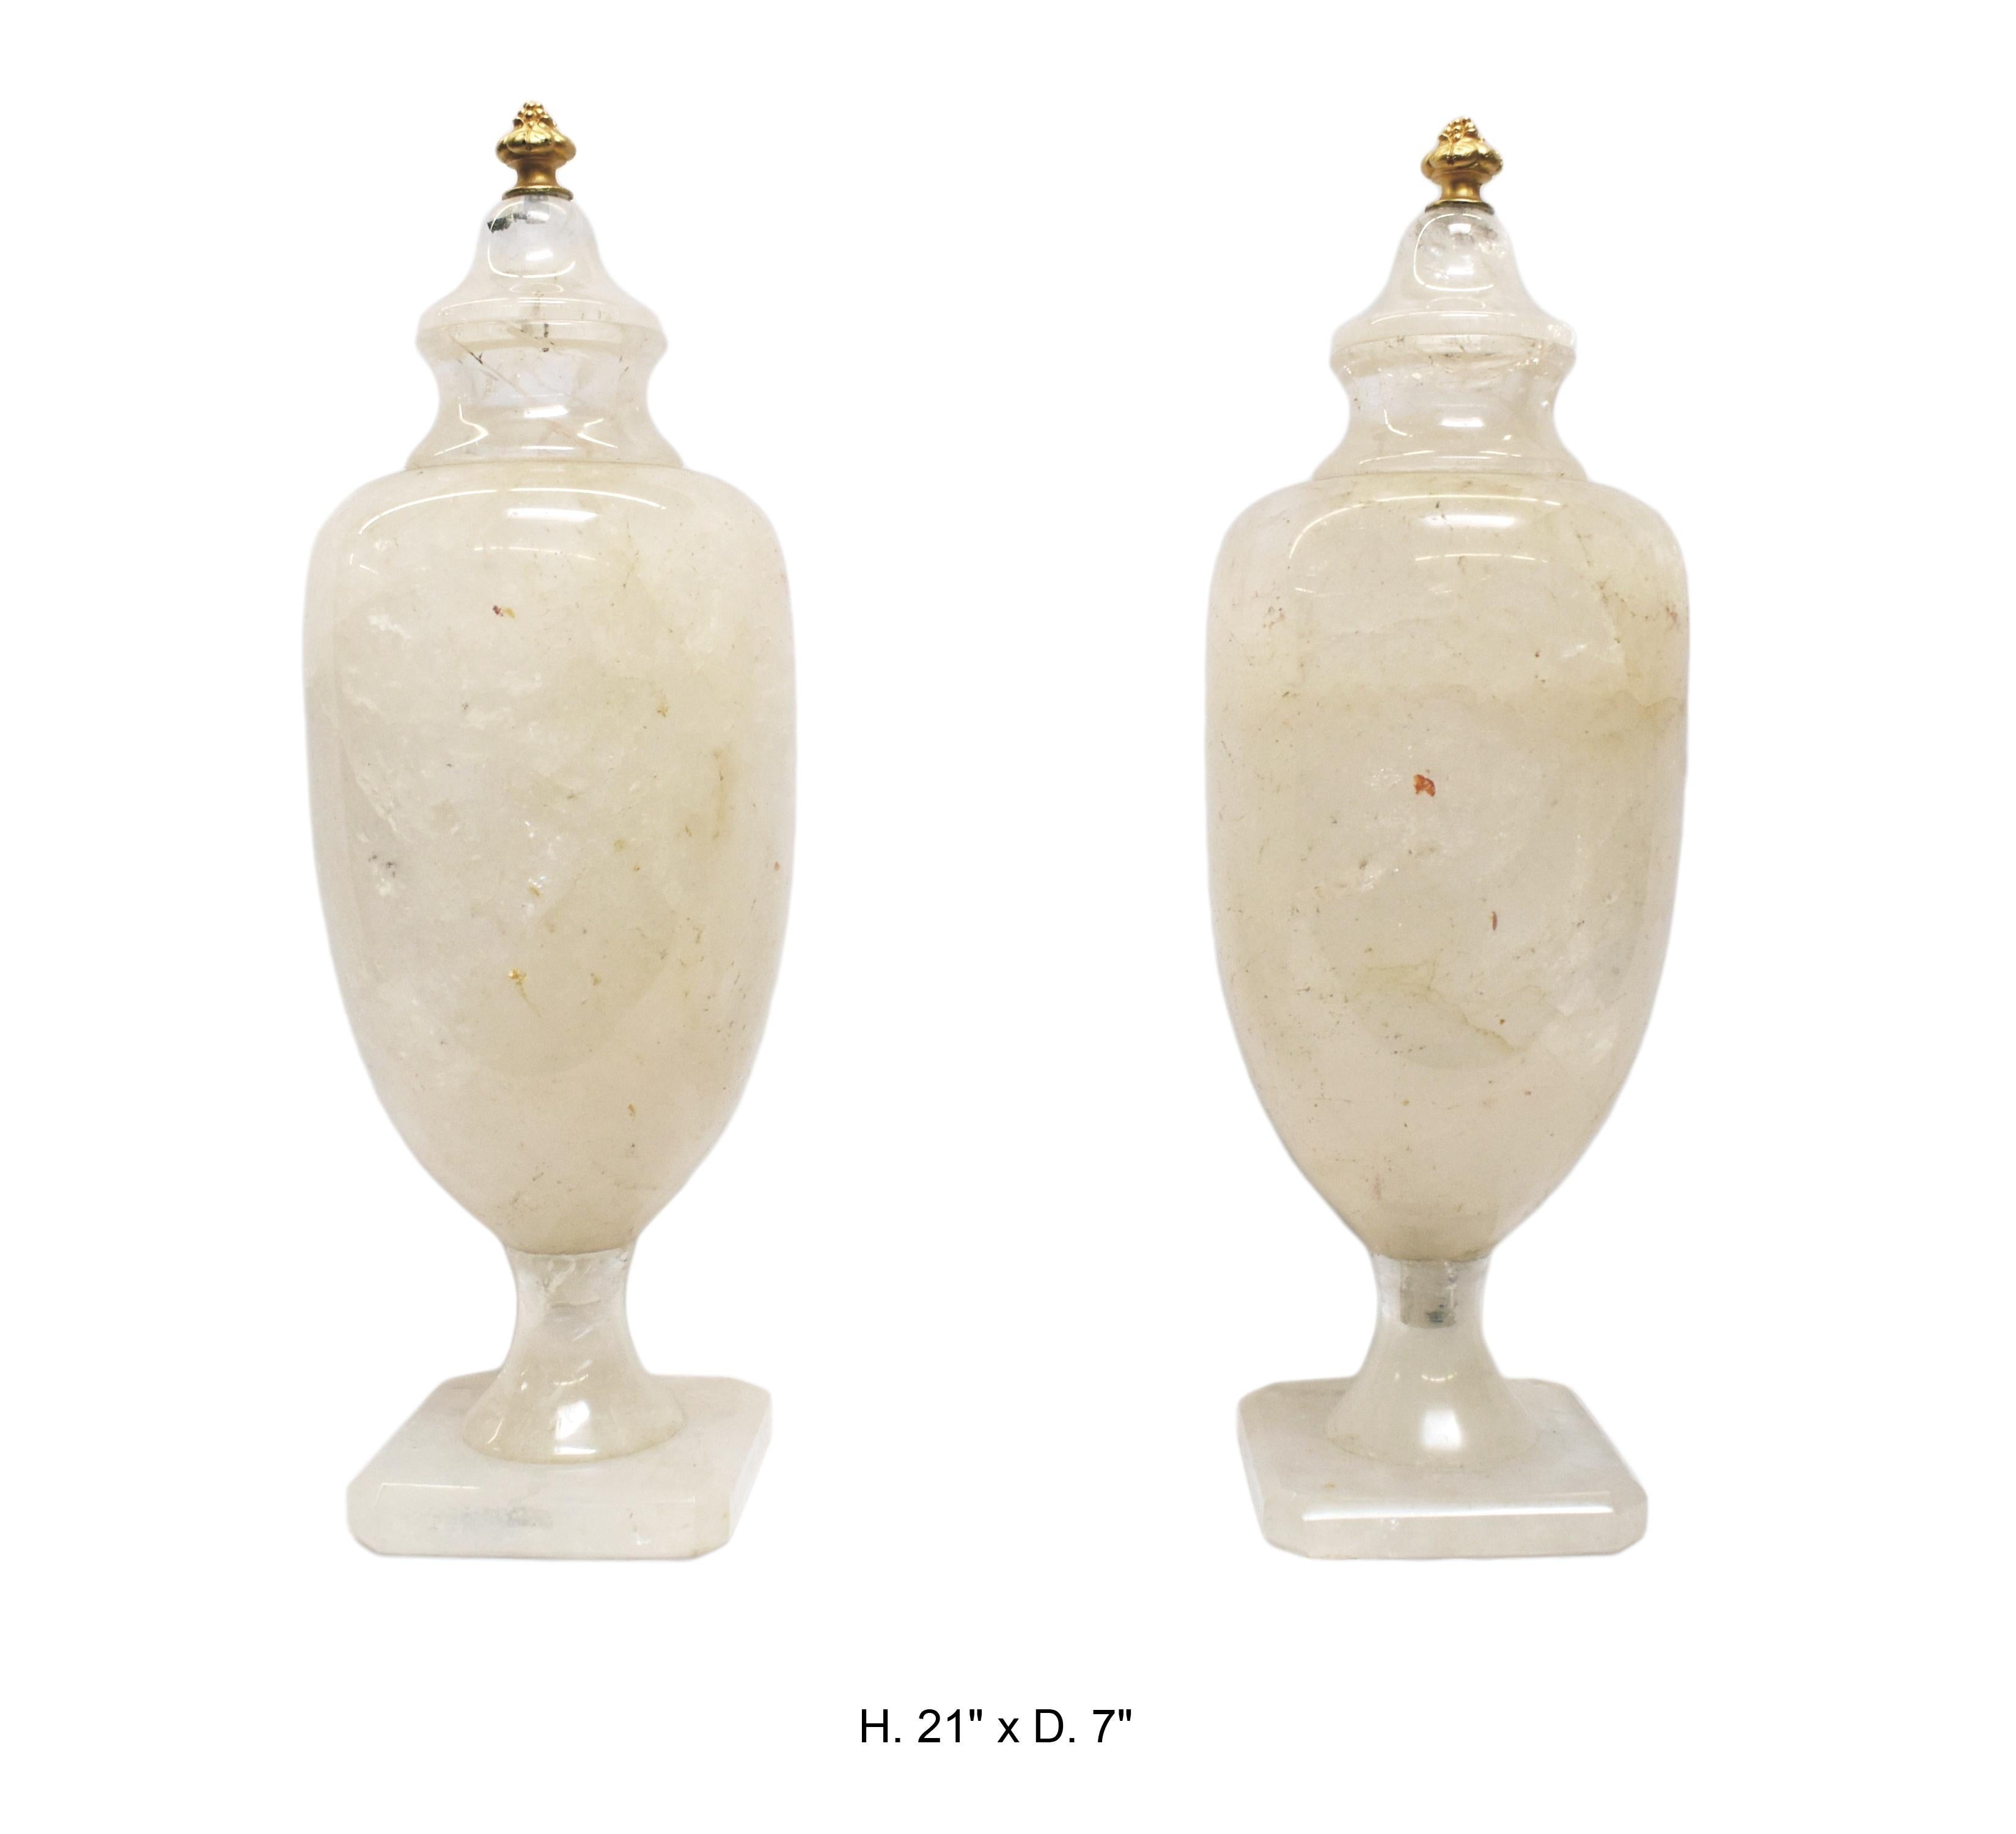 Magnificent pair of Neo-classical style hand-carved and hand-polished rock crystal covered vases. Crowned with ormolu pineapple finials.
The largest we have ever seen in our 40 years in business.
Each urn hollowed out and that make them unique and